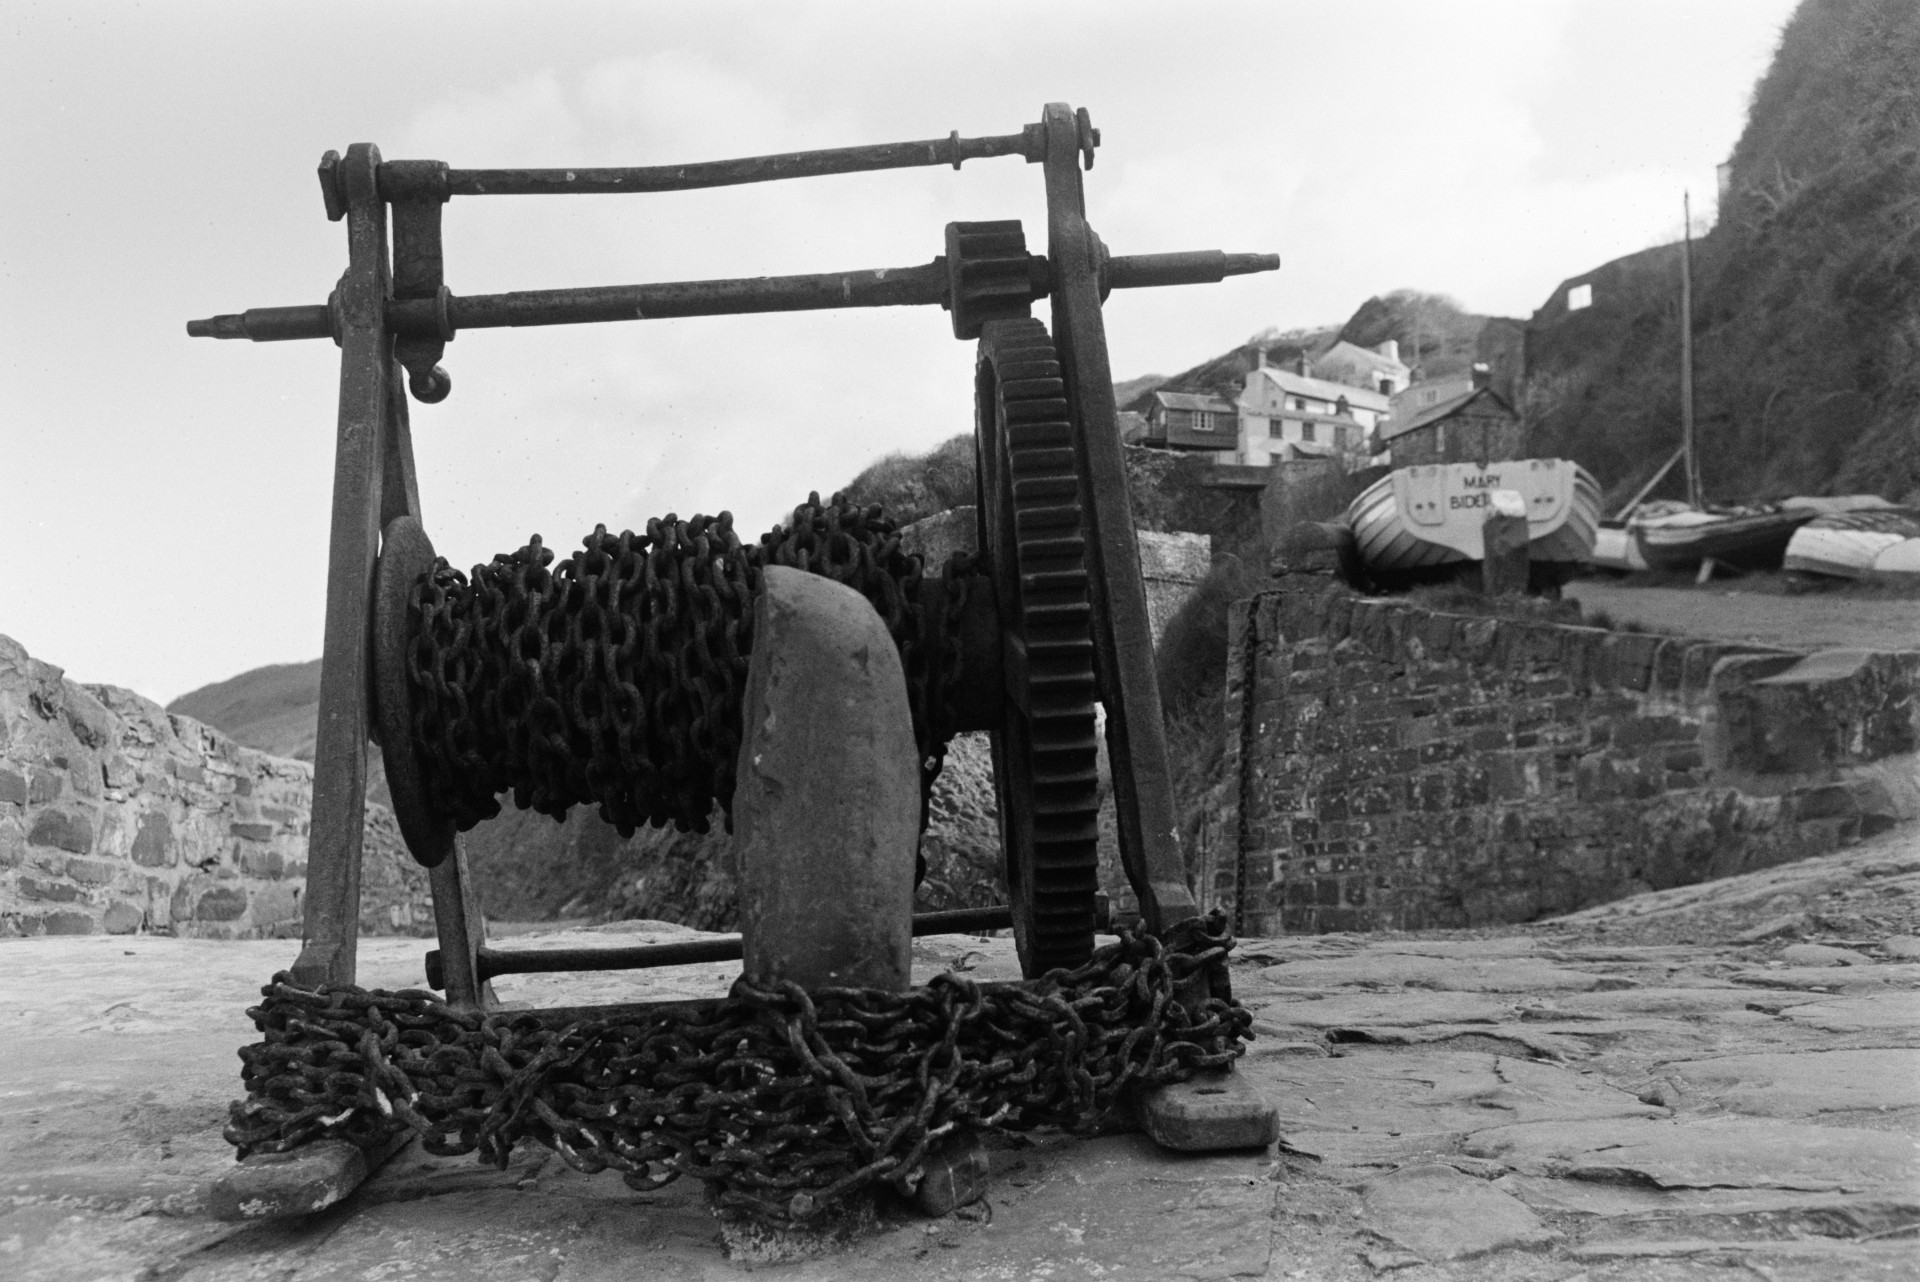 Winch with chains at the top of a slipway at Bucks Mills. Boats and cottages are visible in the background.